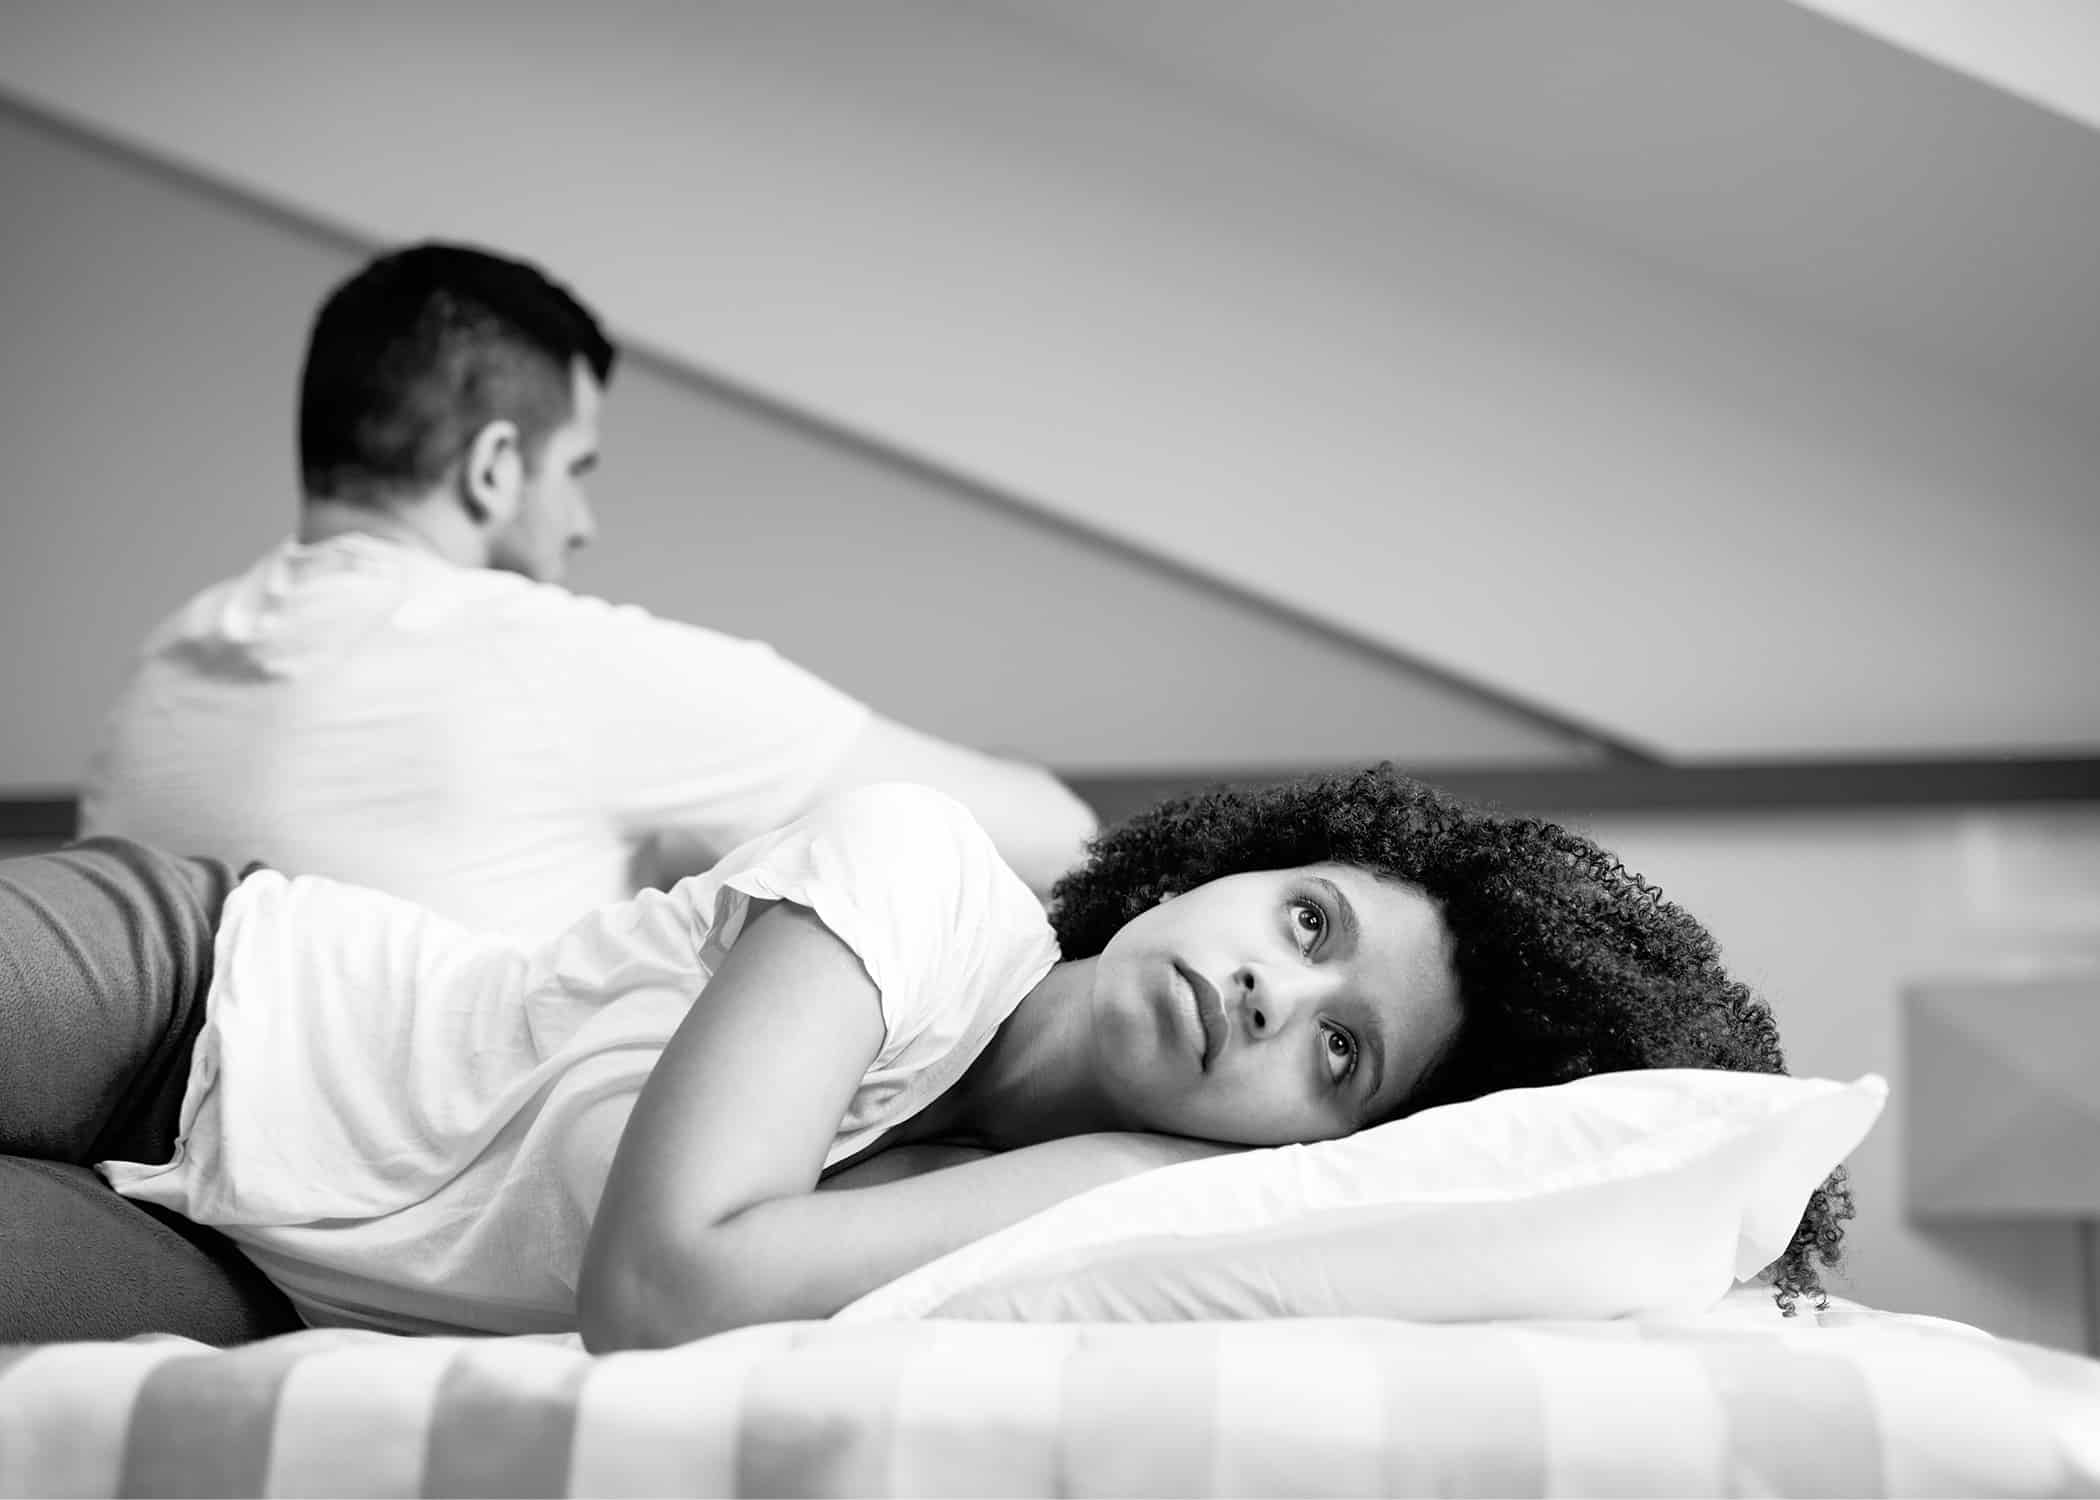 The Best Way to Deal with Mismatched Libidos in Your Marriage